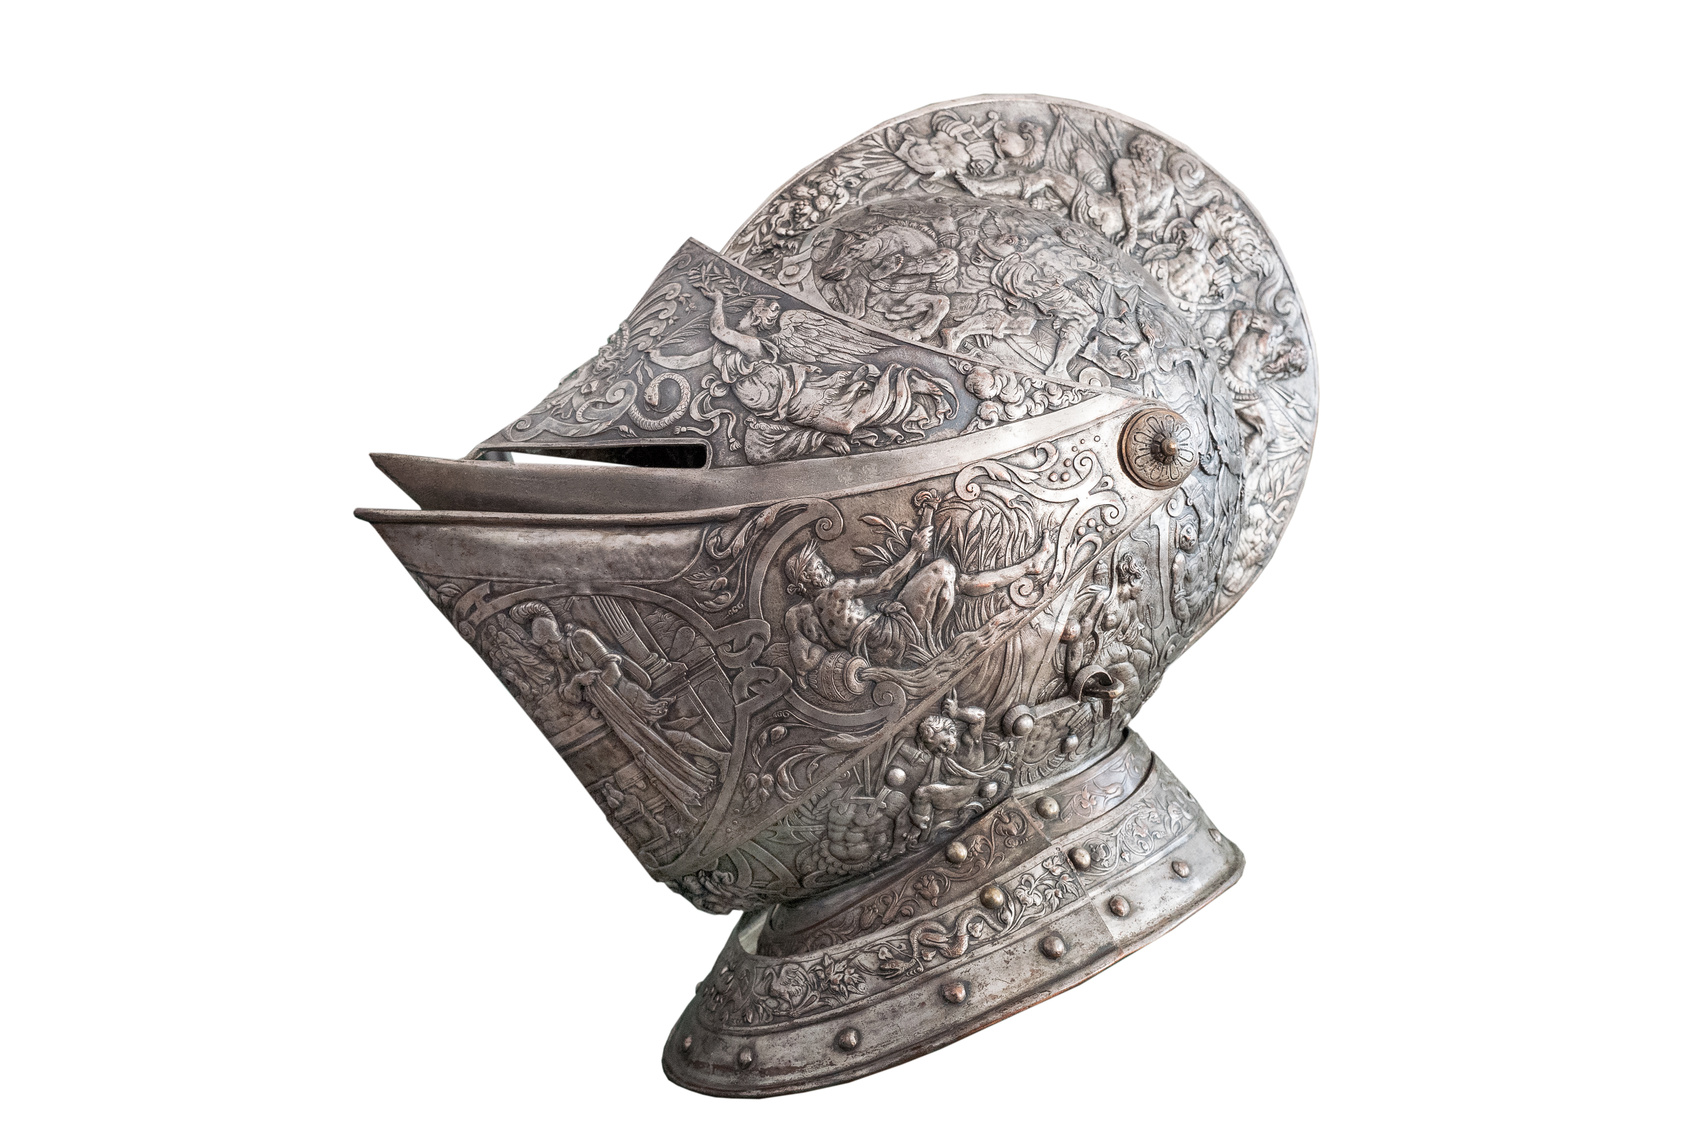 What are some facts about medieval armor?